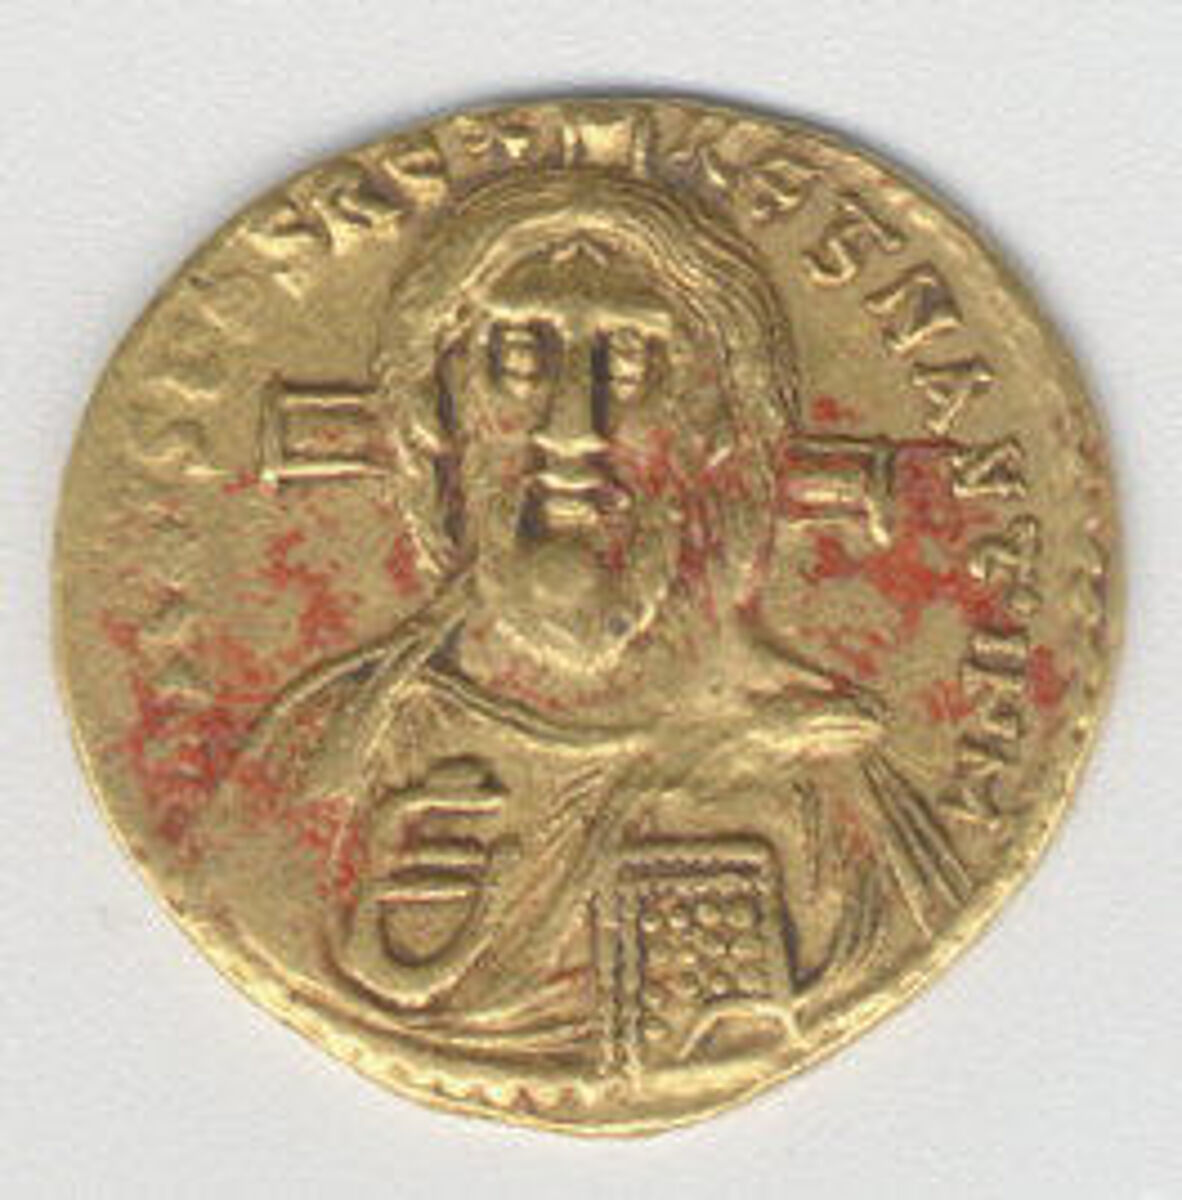 Solidus of Justinian II (685-95), Gold, Byzantine 